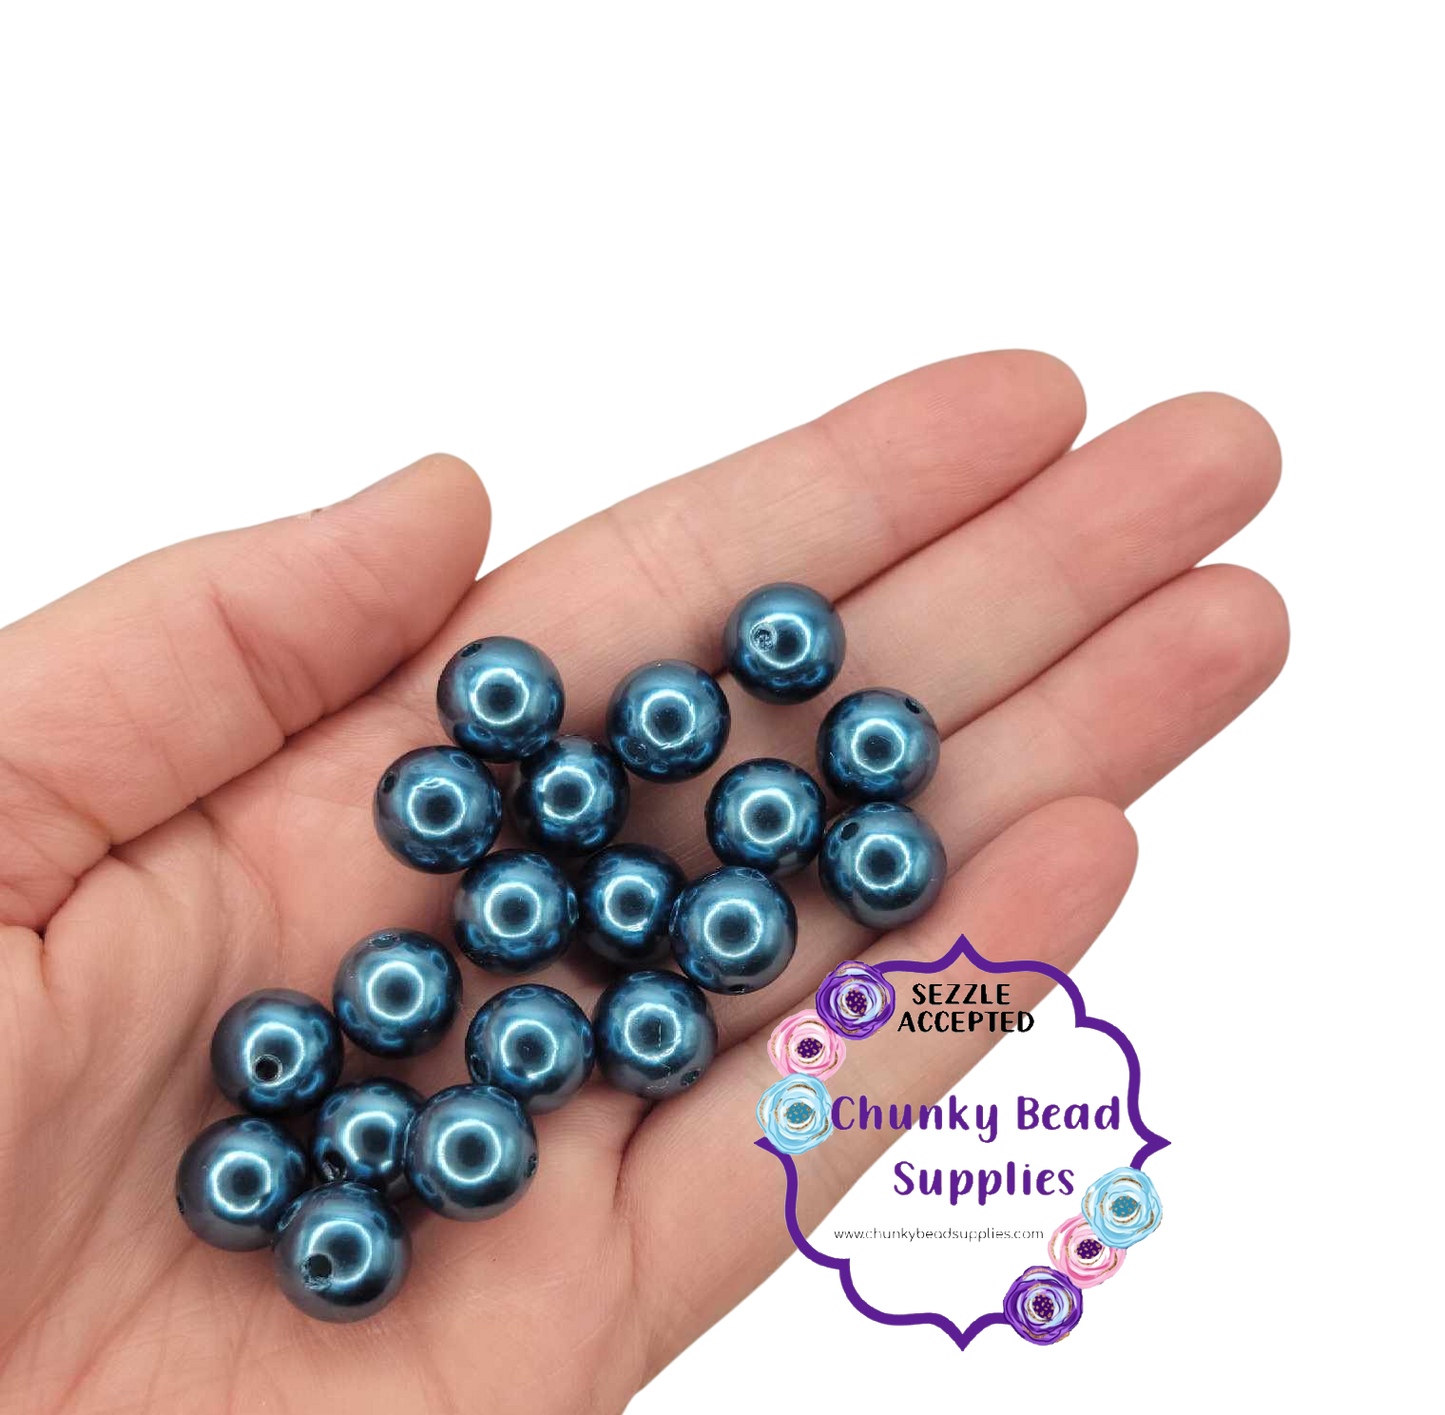 12mm "Teal Blue" Acrylic Pearls